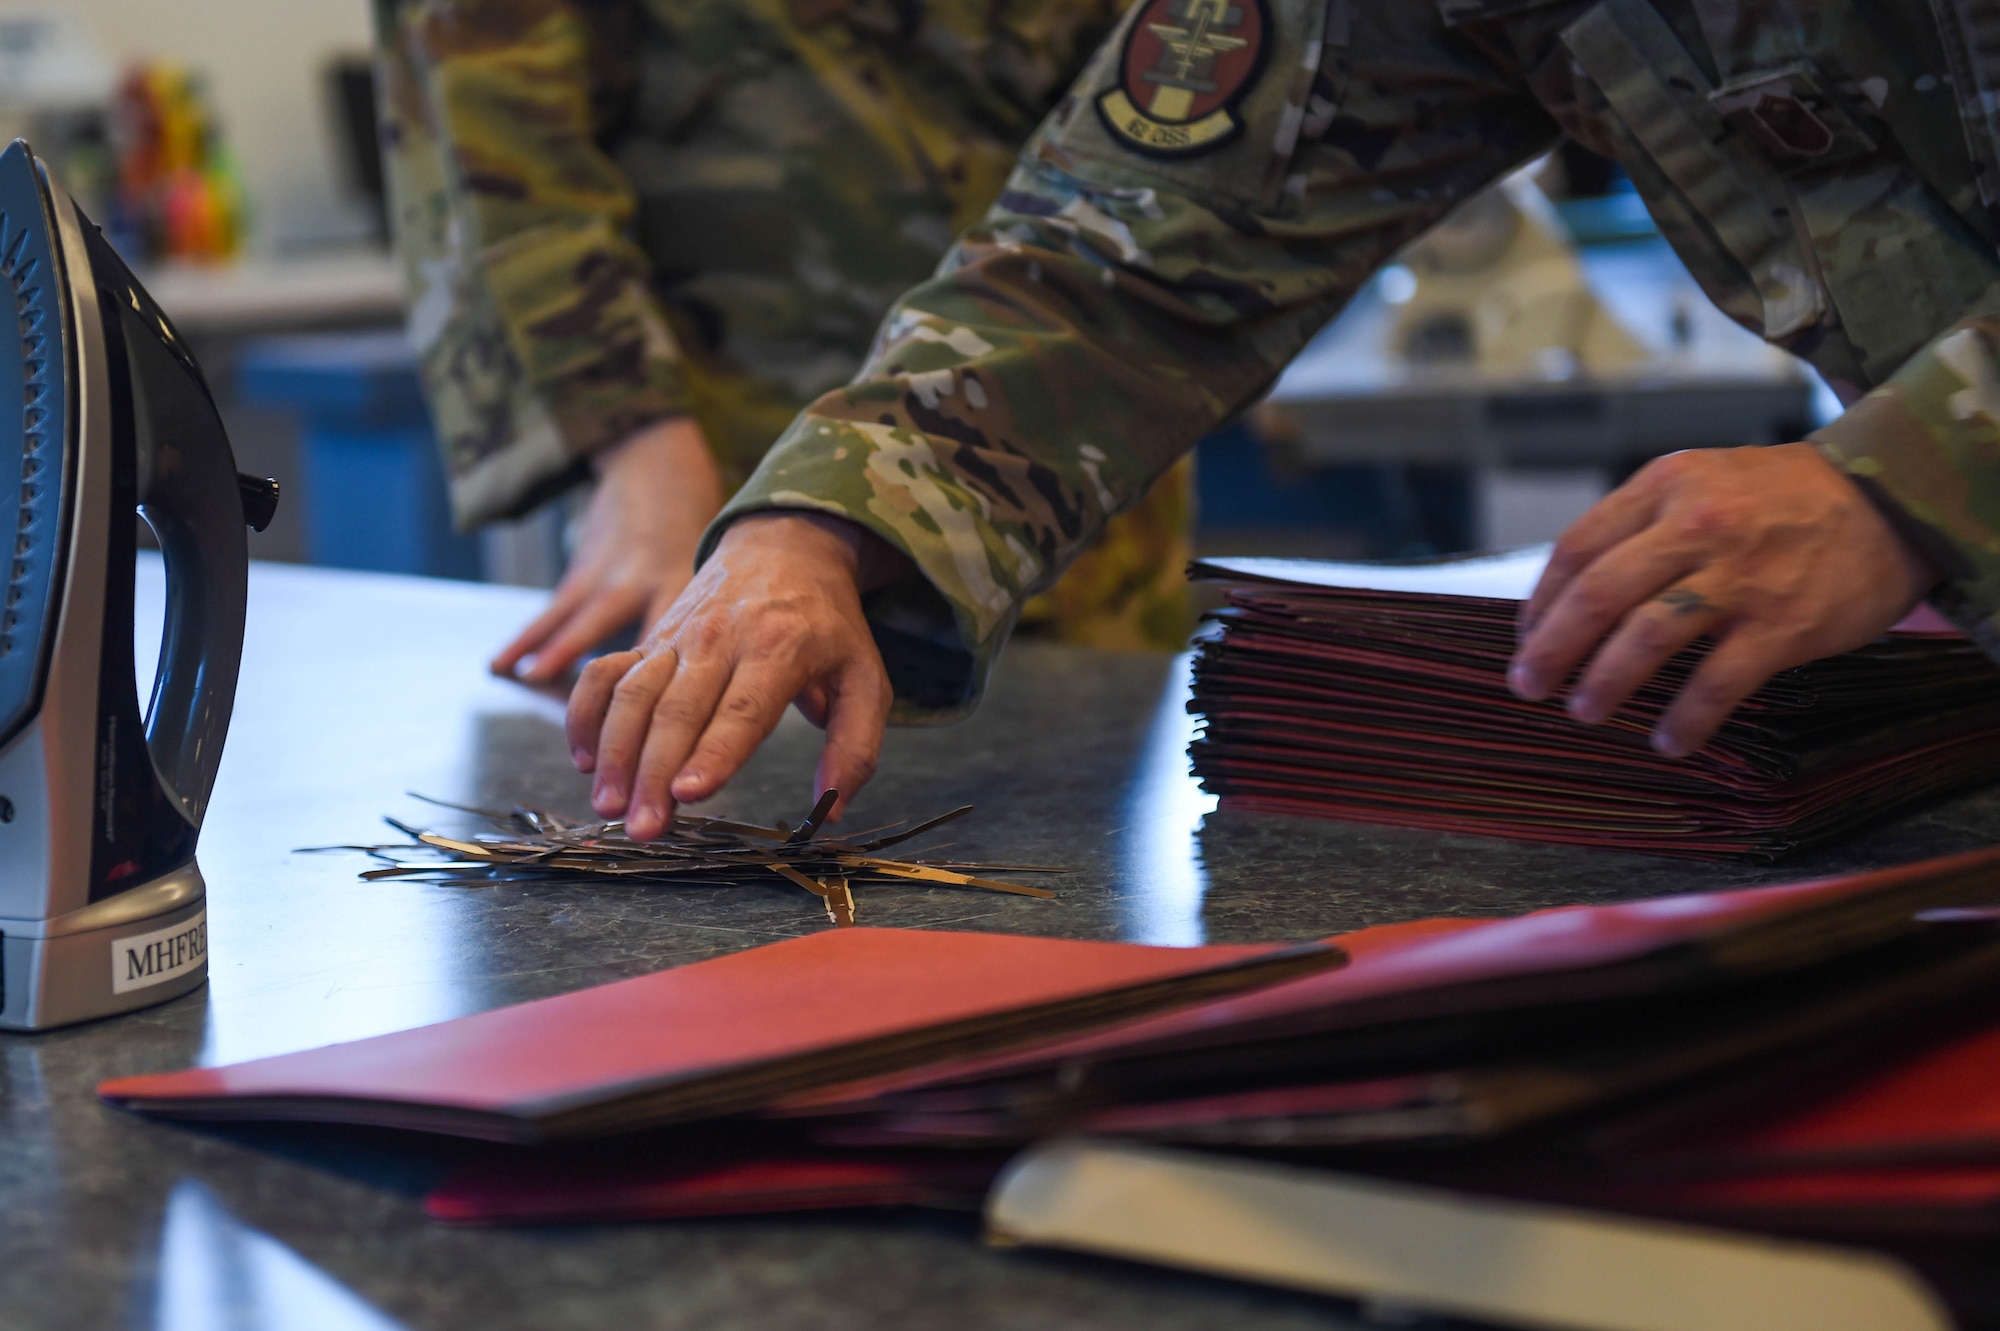 Senior Master Sgt. Samuel Cole, 62nd Operations Support Squadron superintendent, reaches for a pile of metal strips taken from folders to produce cloth face masks at the 62nd OSS aircrew flight equipment fabrication shop on Joint Base Lewis-McChord, Wash., April 6, 2020. The metal strips were sewn into the part of the mask that goes over the nose to make it more form-fitting and create more of a seal. (U.S. Air Force photo by Airman 1st Class Mikayla Heineck)